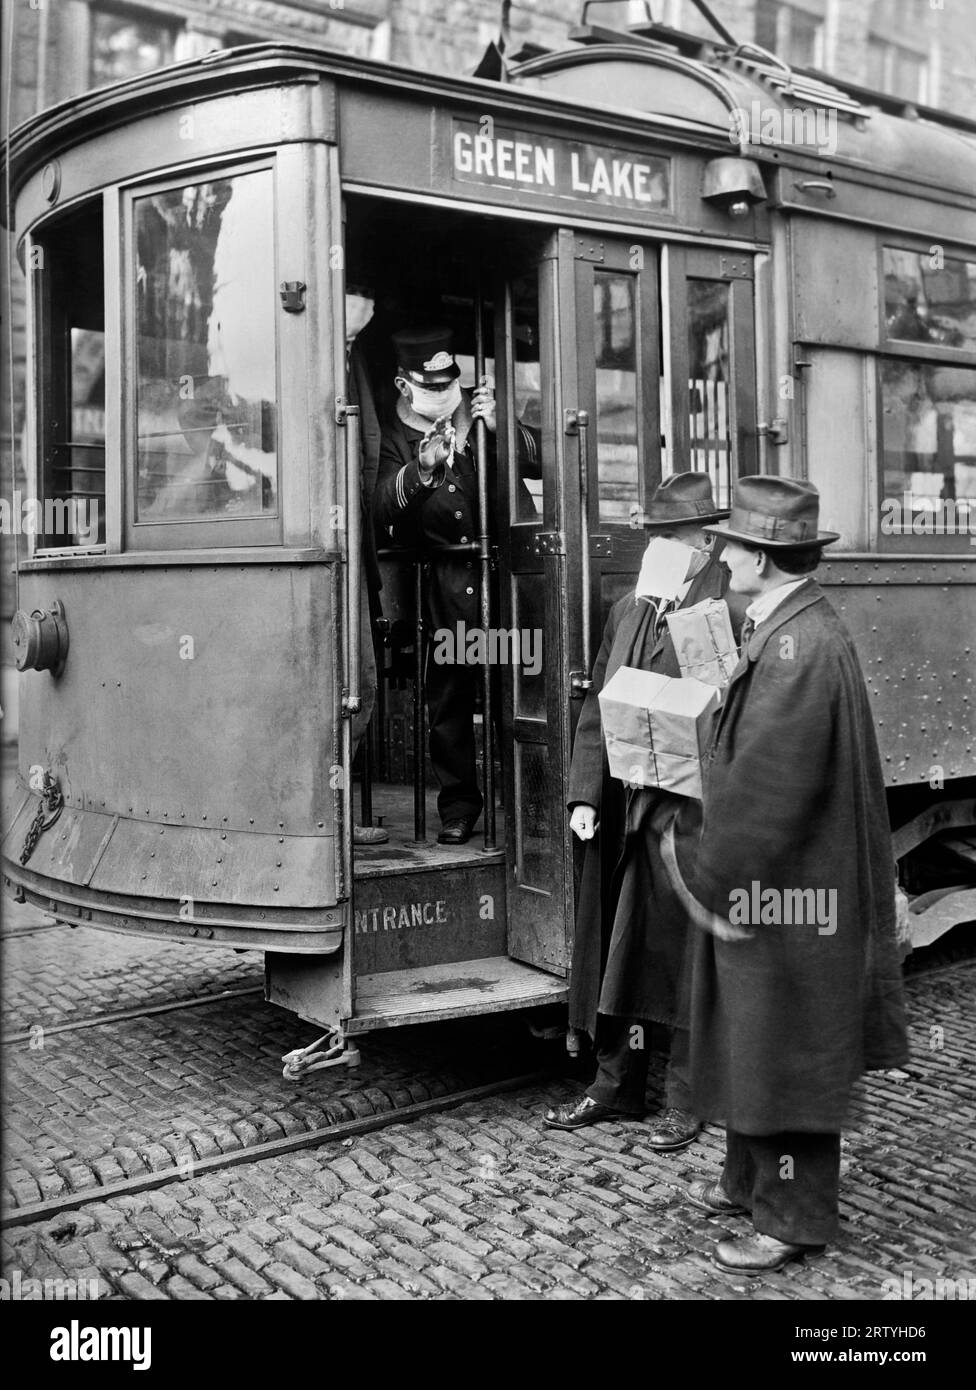 Seattle, Washington  c 1918 In Seattle, during the Spanish Influenza epidemic, street cars would not allow passengers to board without wearing a mask. Stock Photo